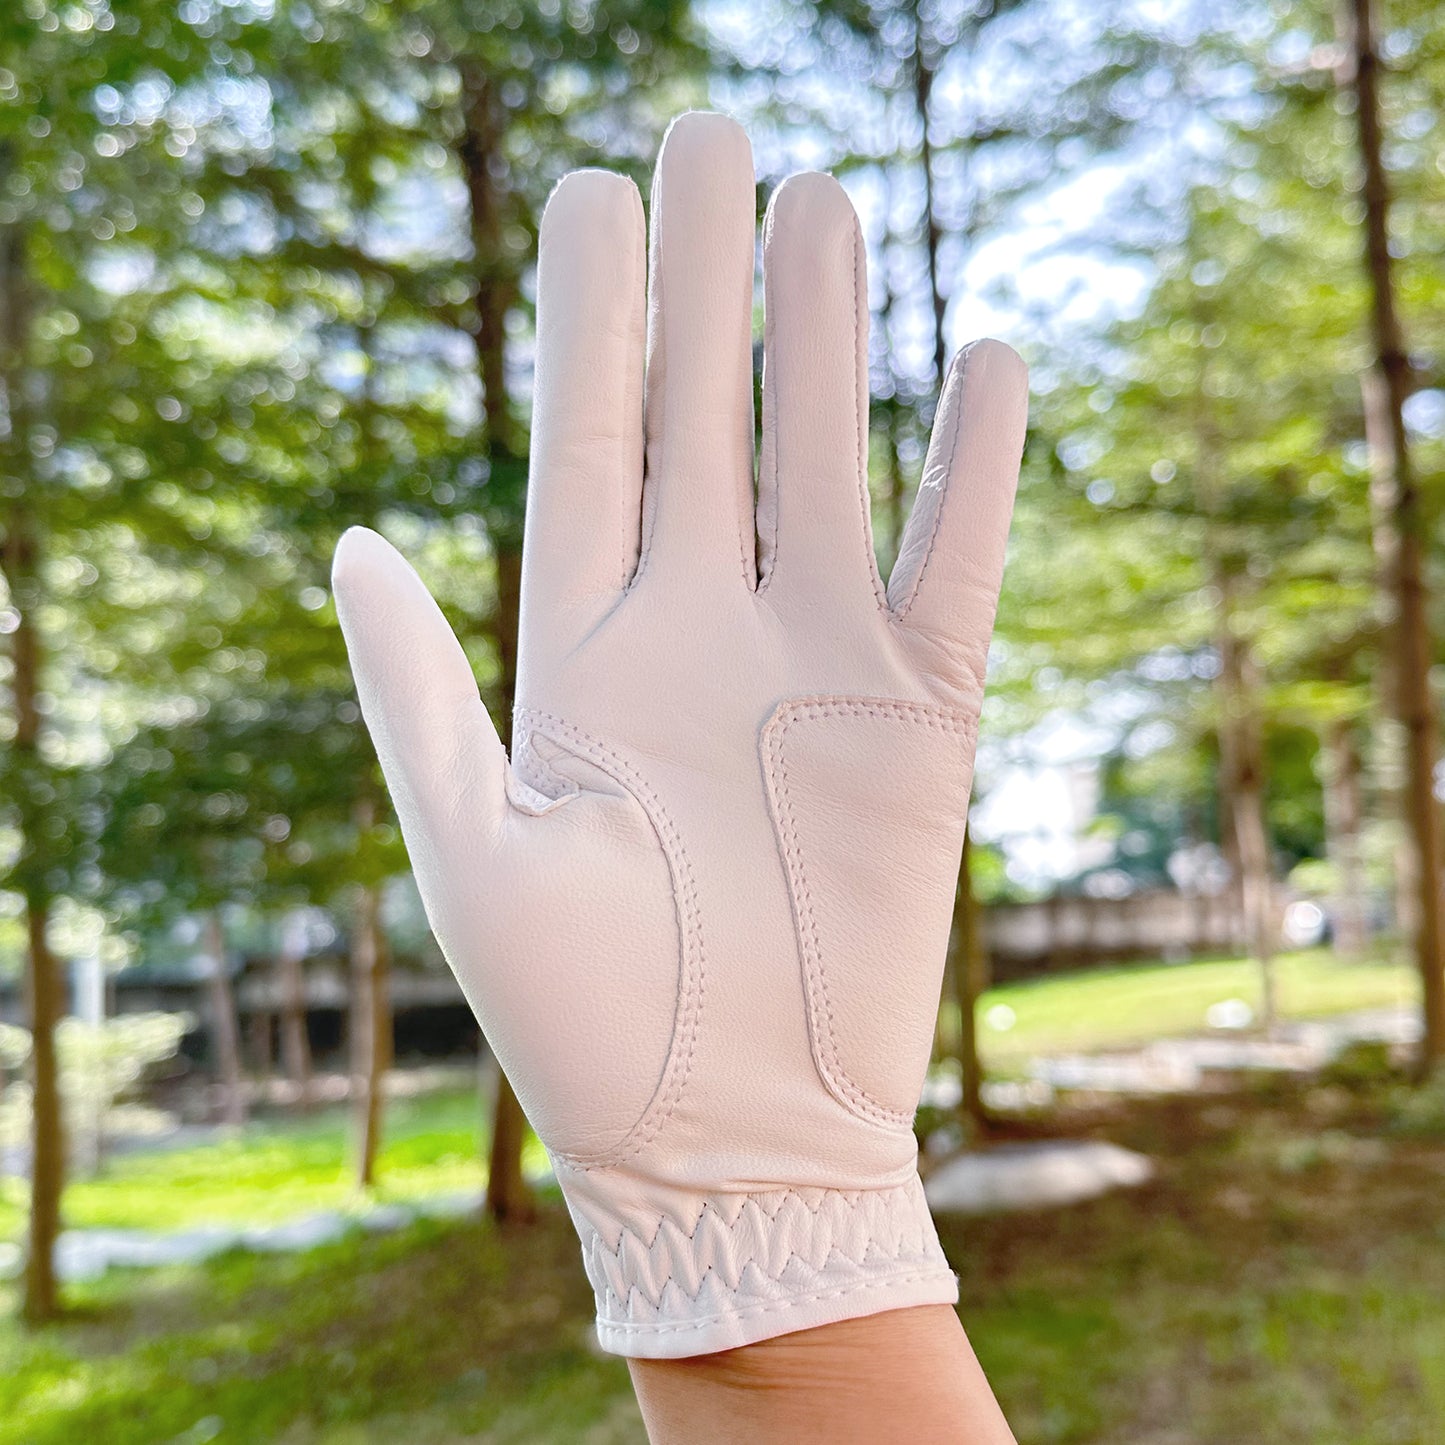 PINKTEE Women's Cabretta Leather Left Hand Golf Glove with Ball Marker, Size Small Medium Large XL